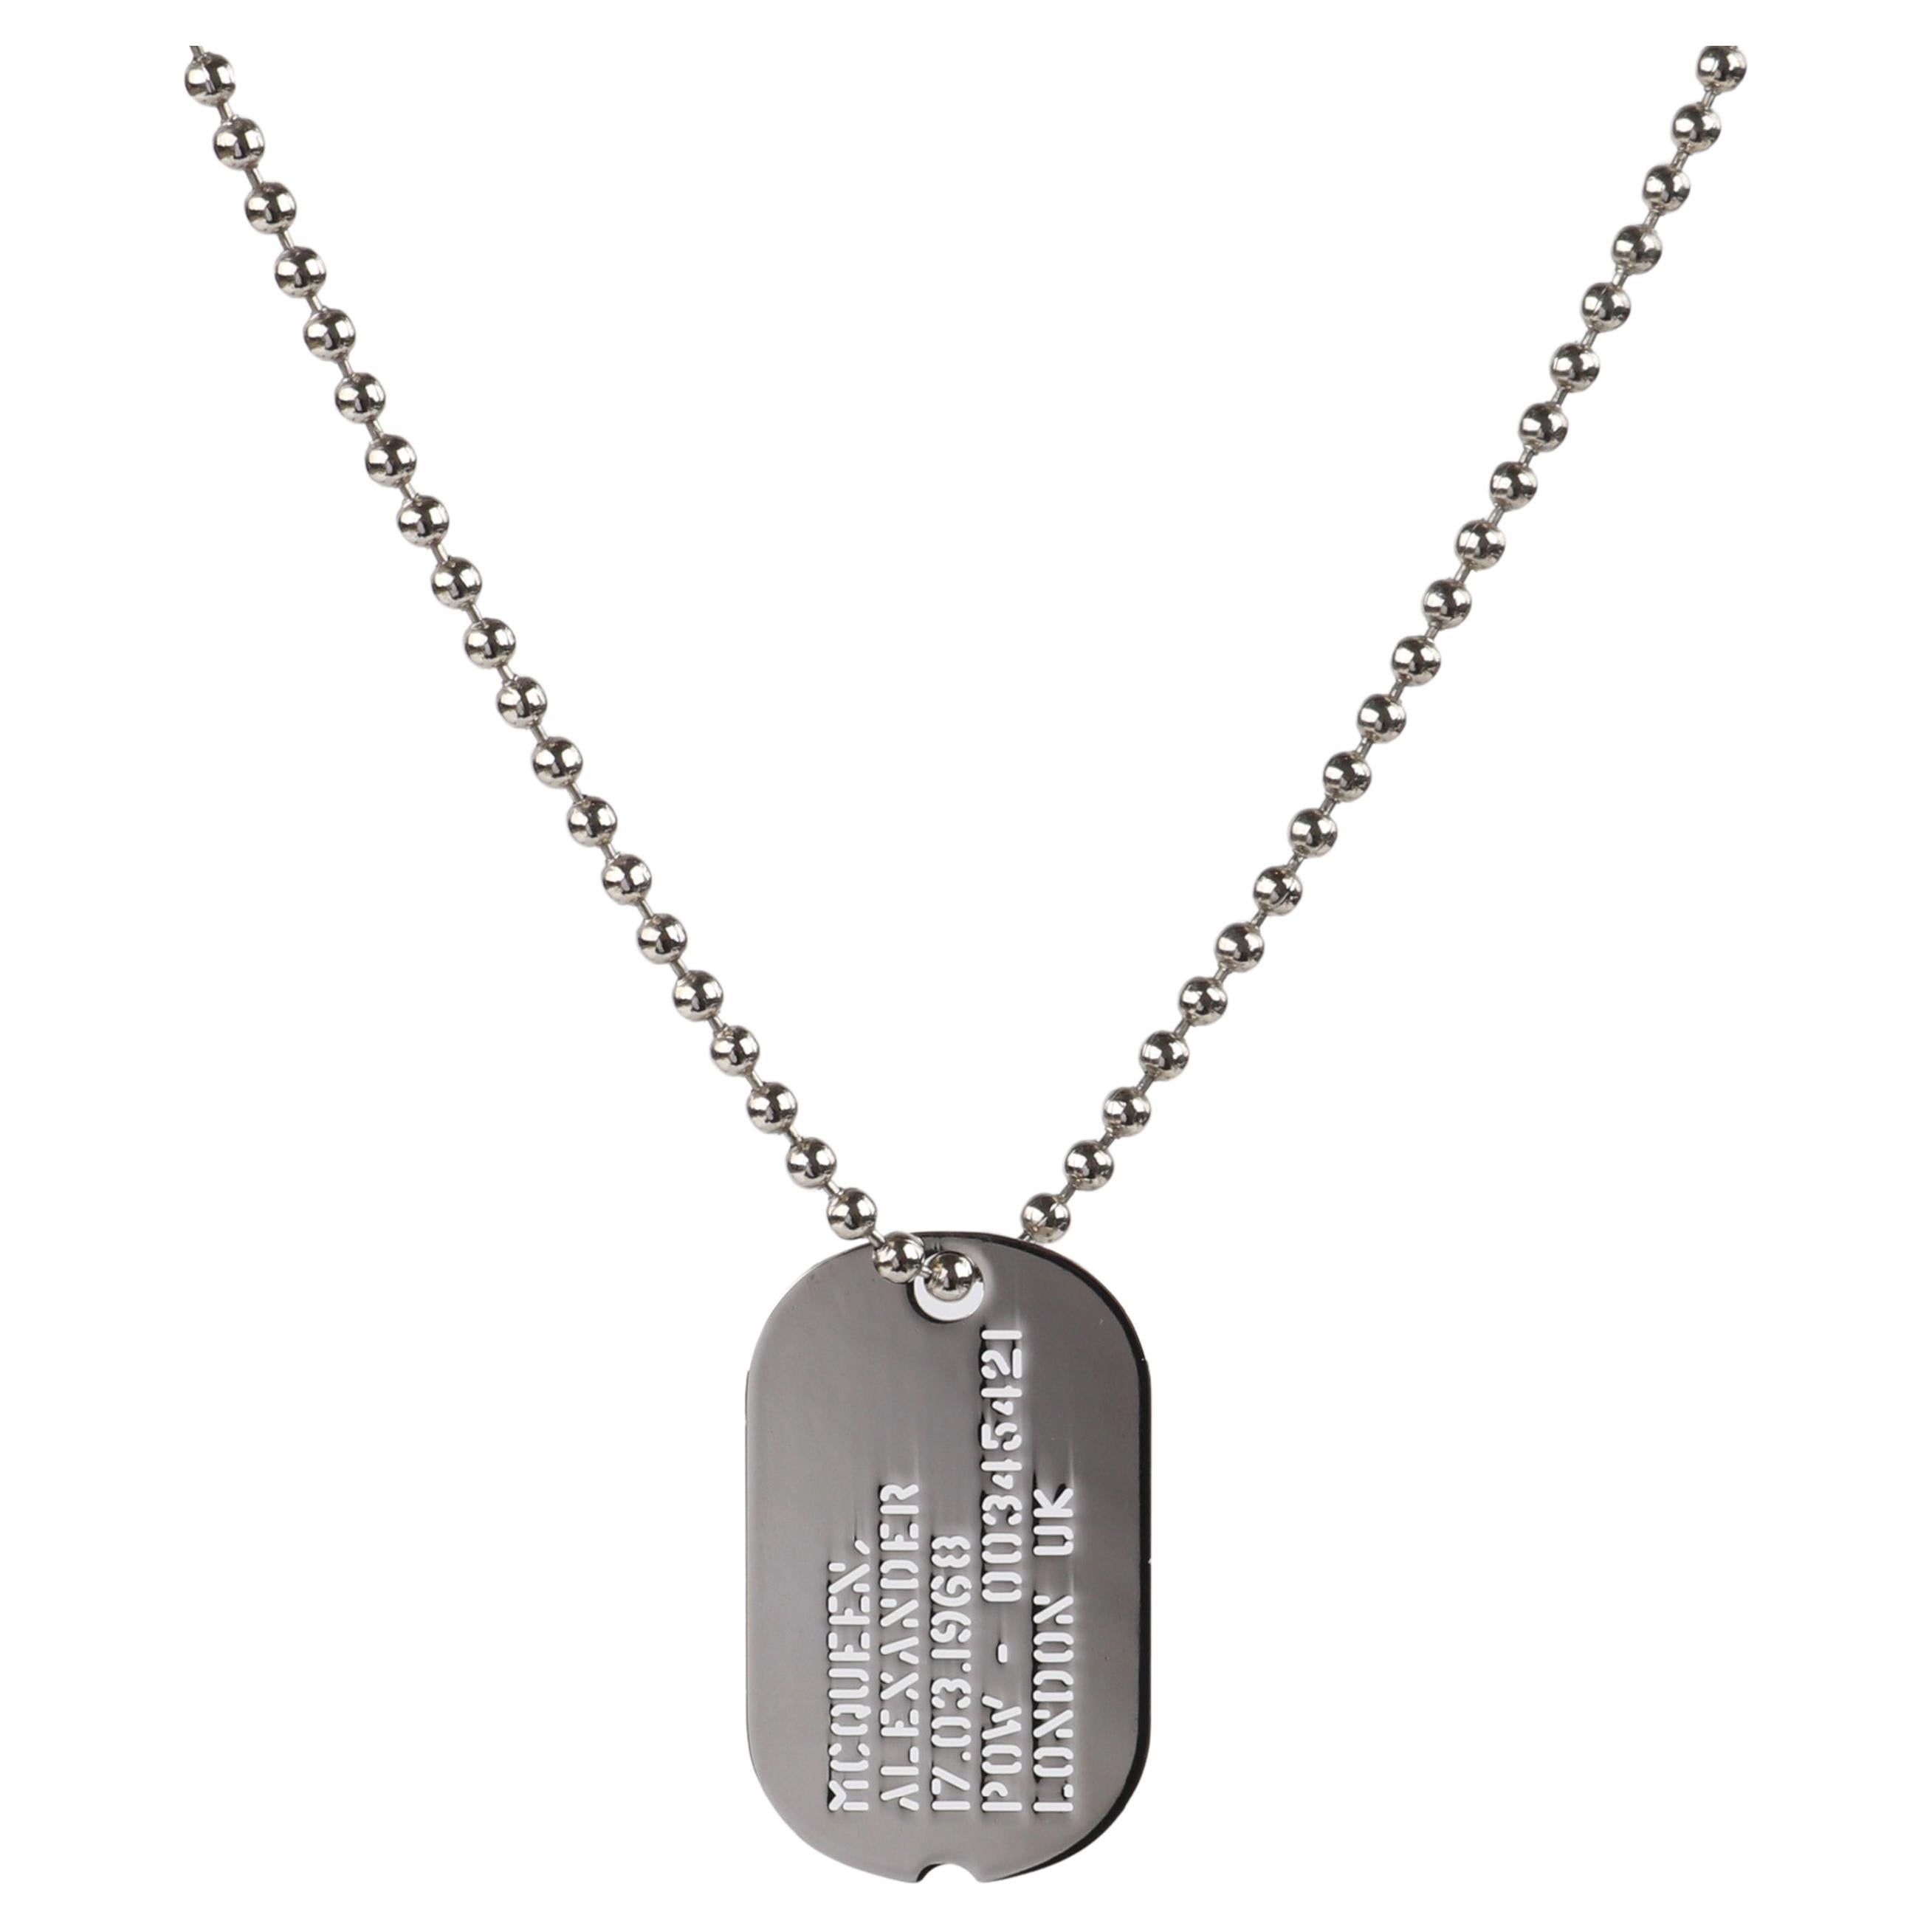 ALEXANDER McQUEEN A/W 2005 Silver Bead Chain Military Dog Tag Pendant Necklace